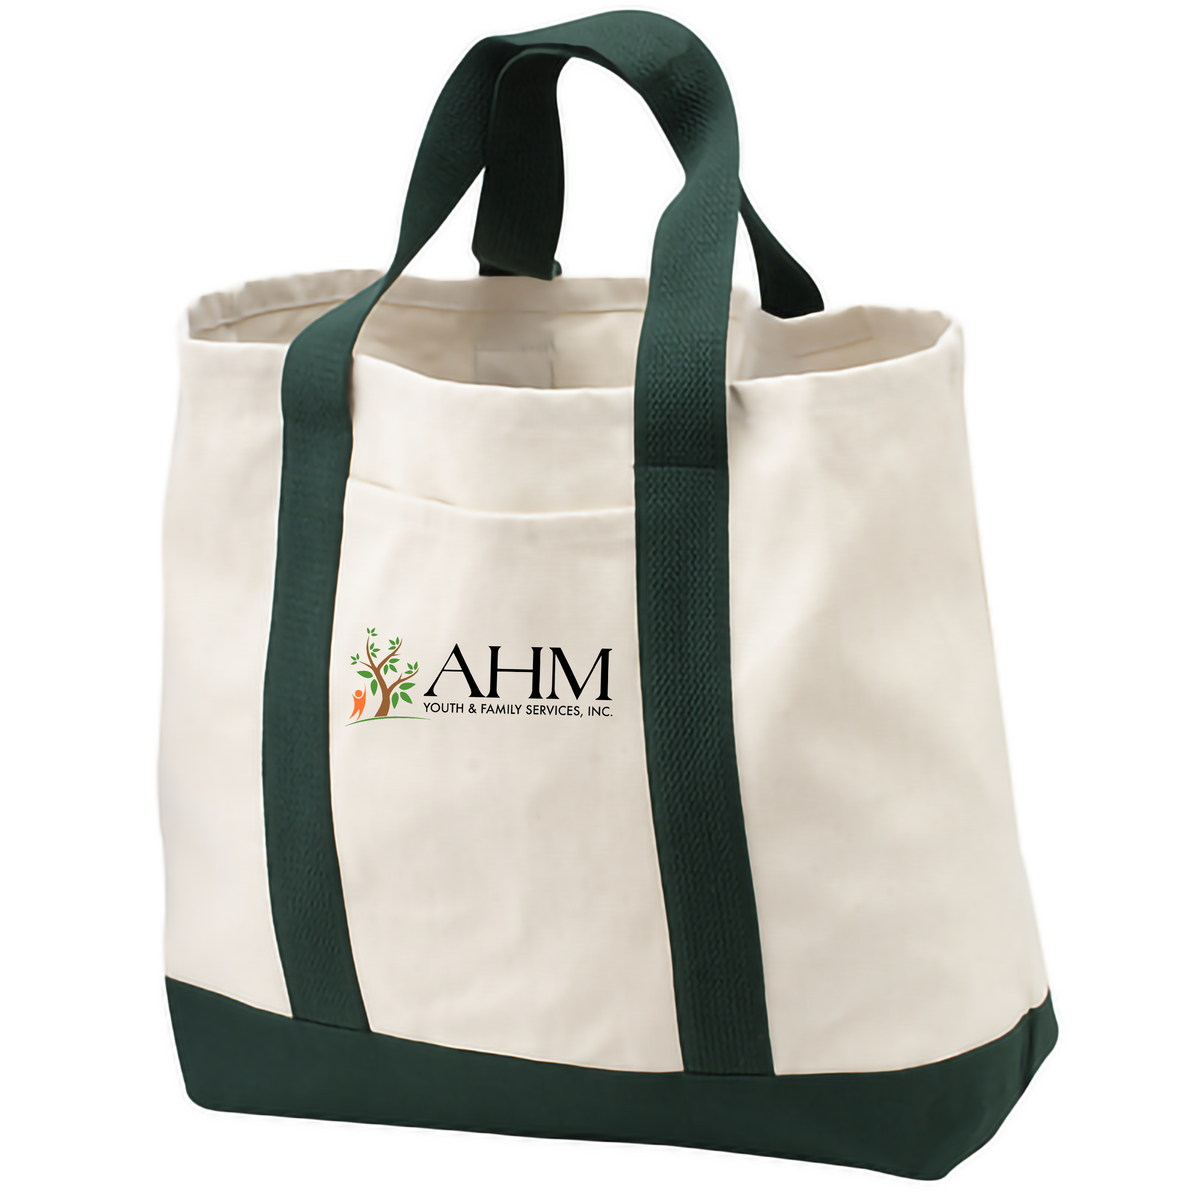 AHM Youth & Family Services Two Tone Shopping Tote